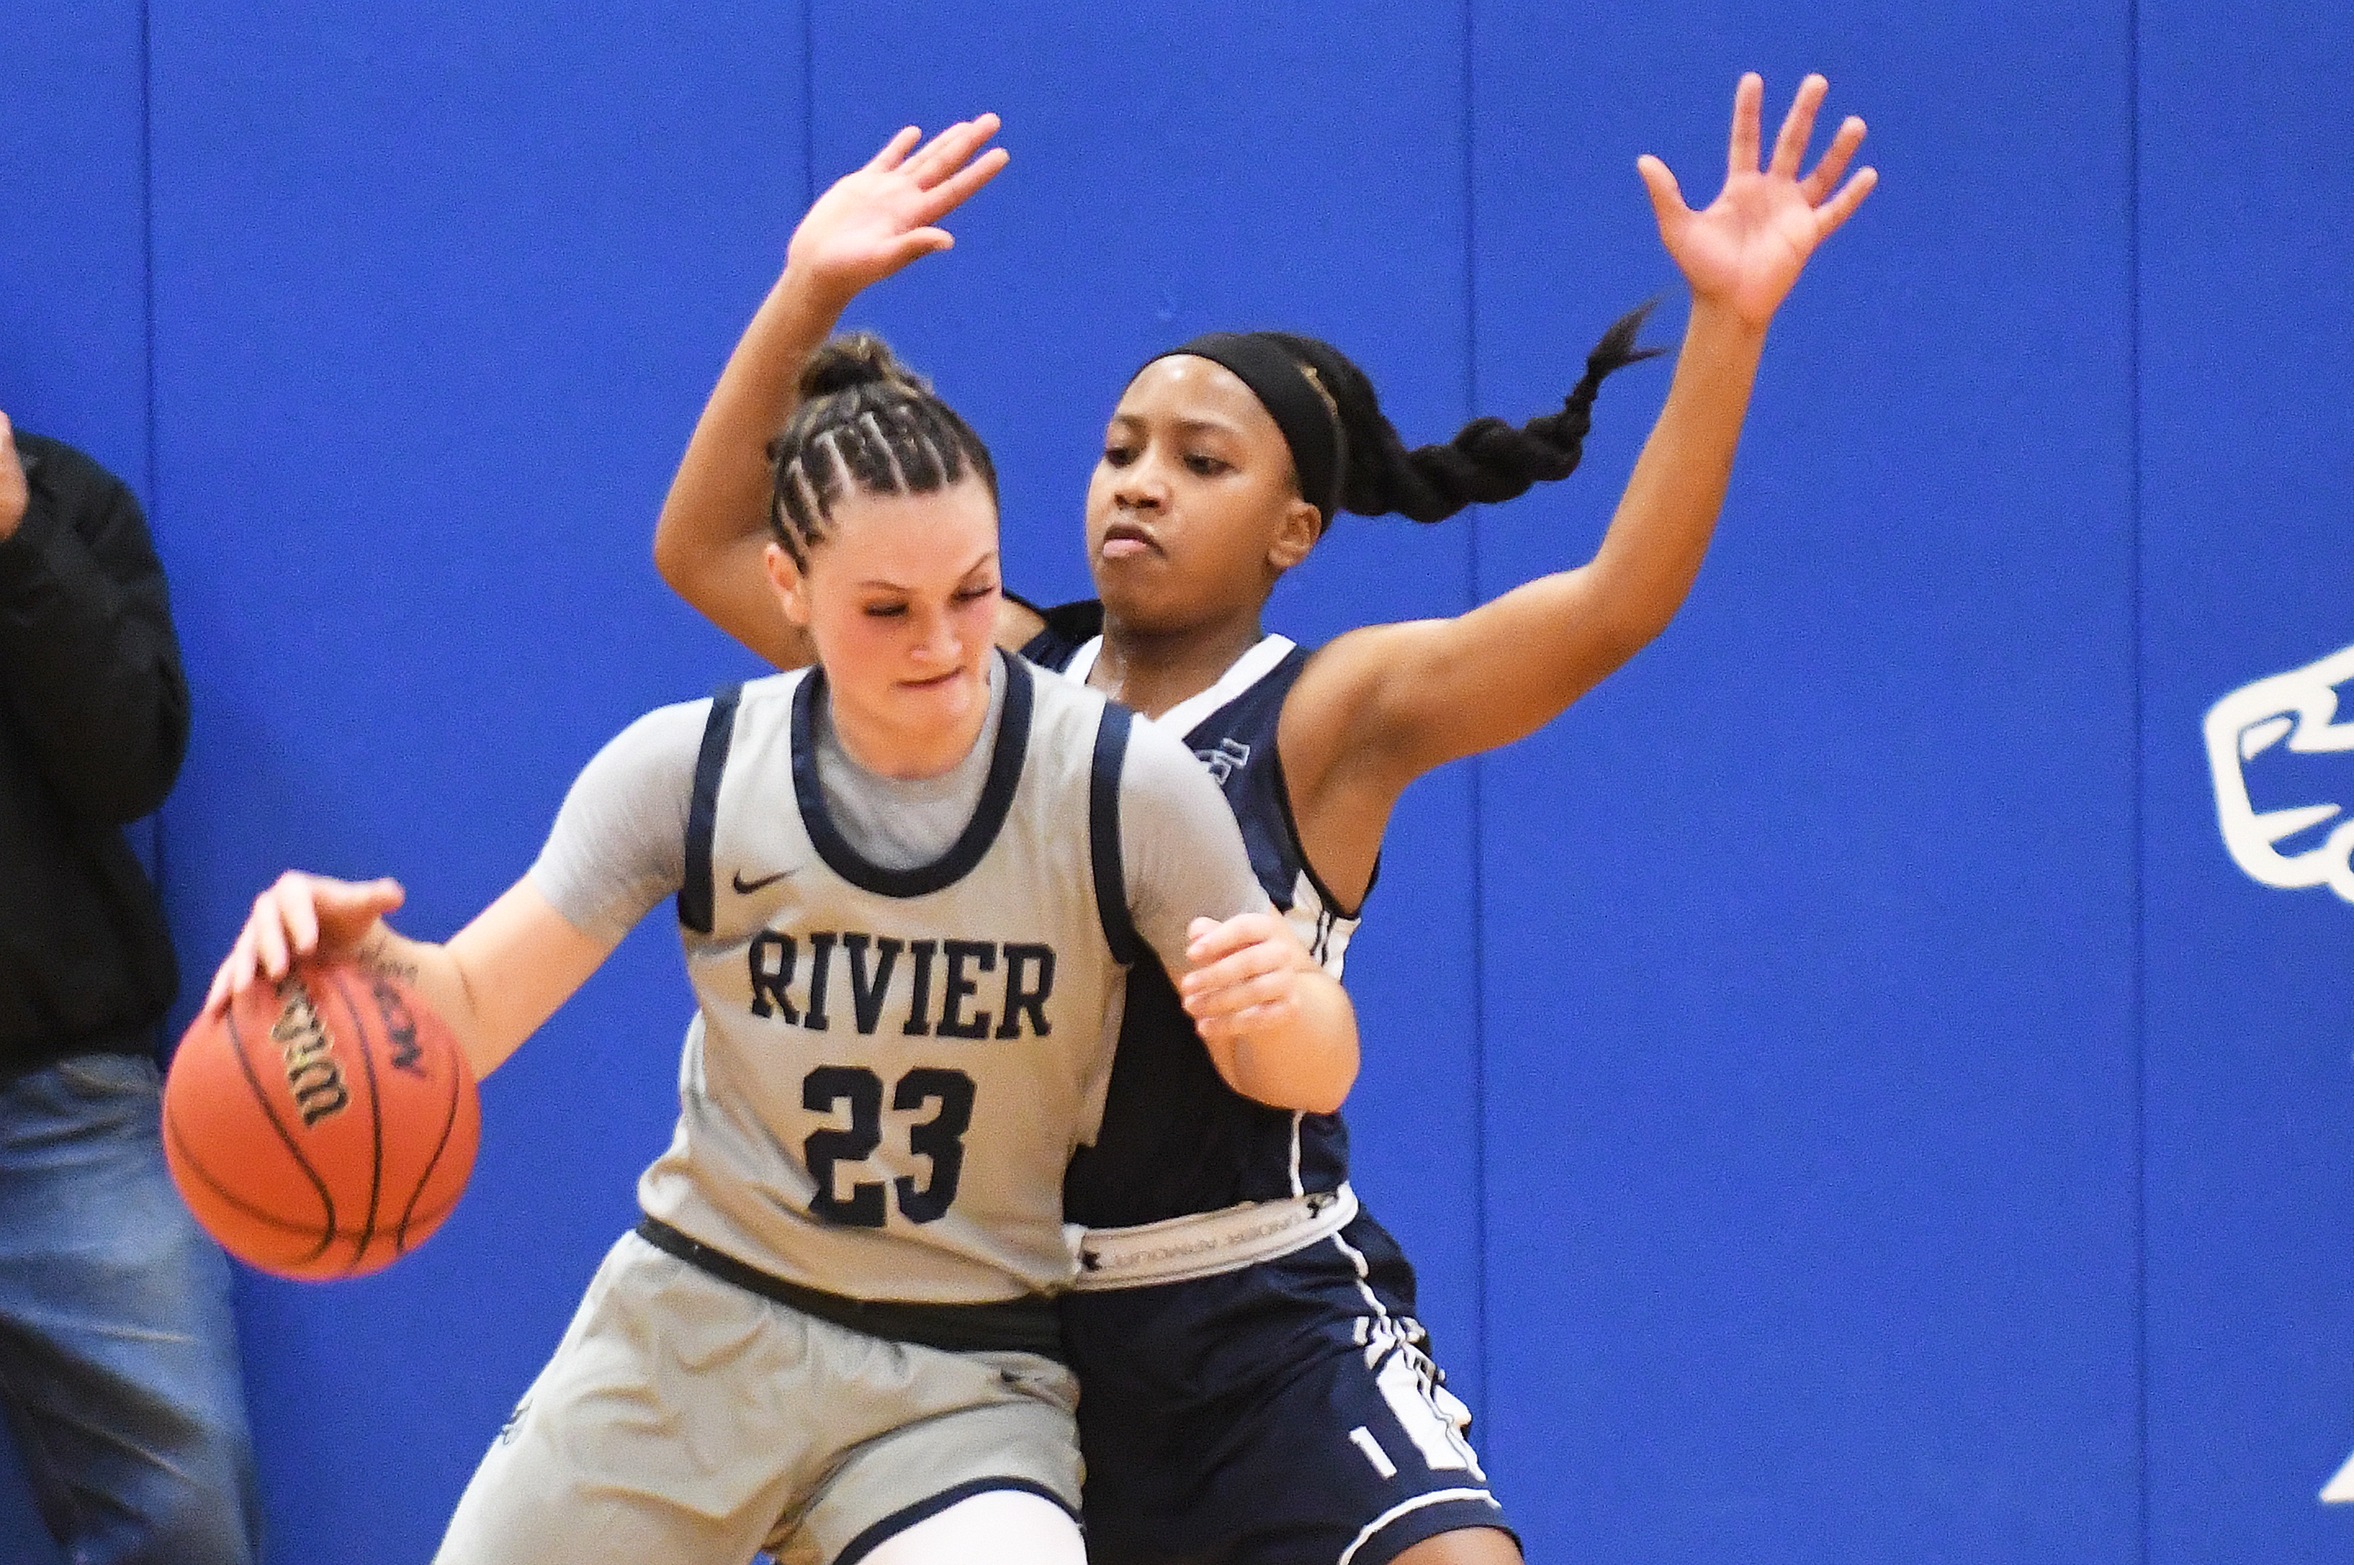 Big Fourth Quarter Lifts Women’s Basketball Over Wellesley